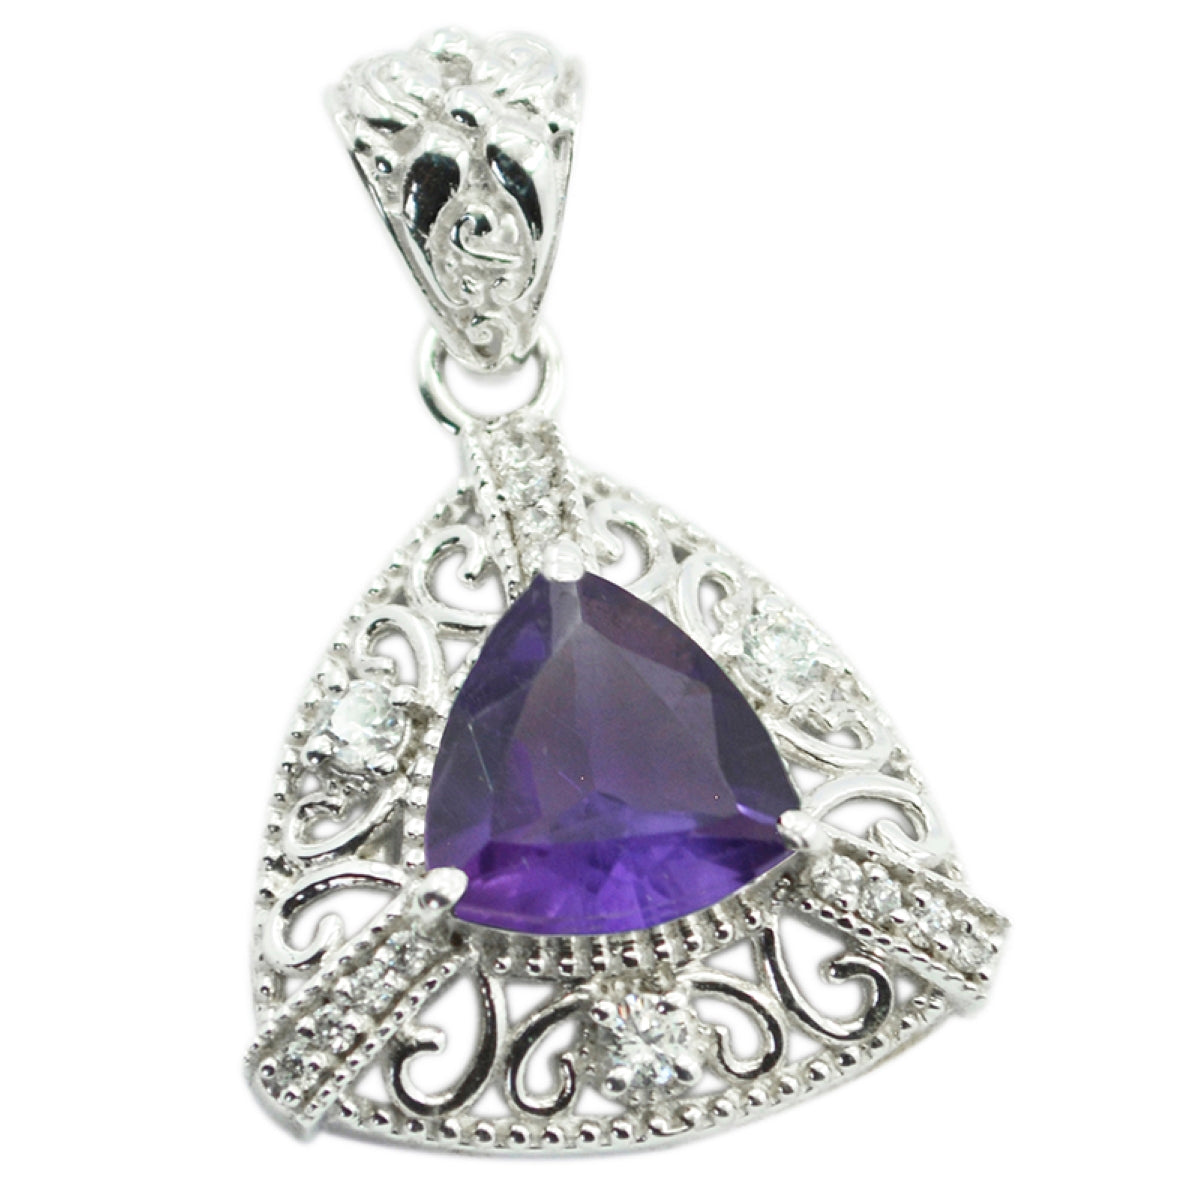 Riyo Real Gemstones Triangle Faceted Purple Amethyst Solid Silver Pendant gift for mom birthday